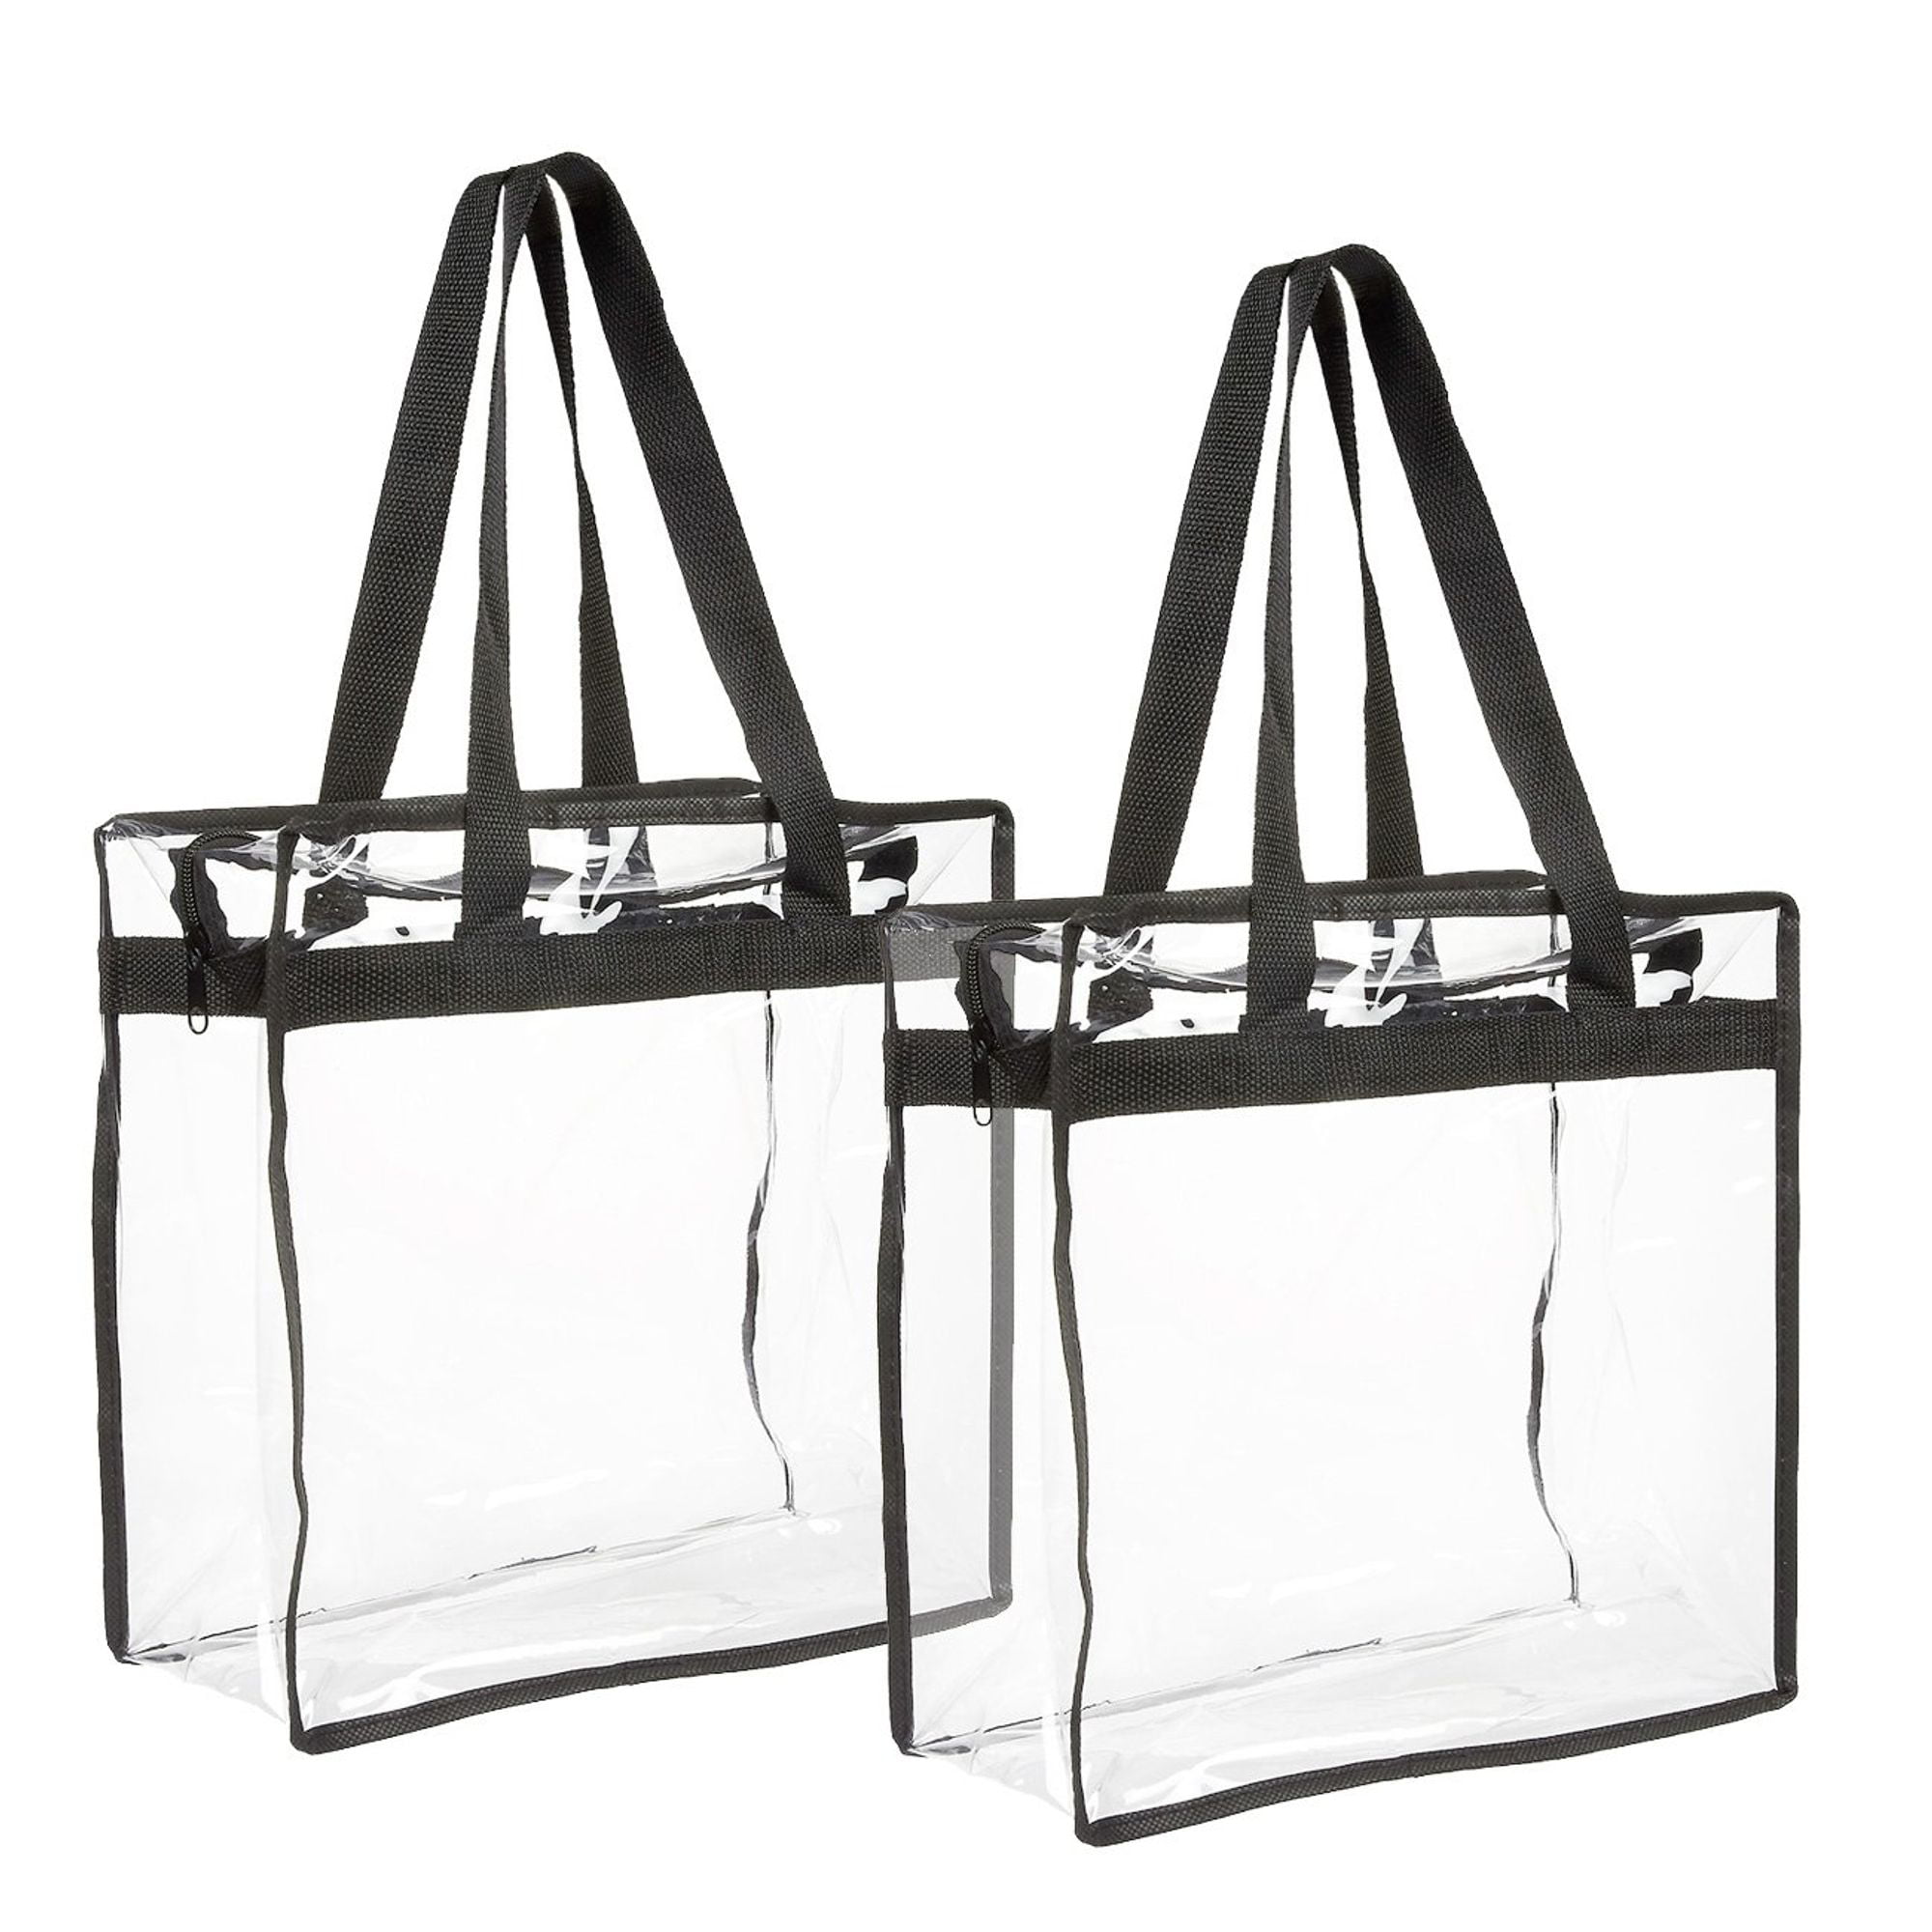 2-Pack Transparent Bag - Clear Tote Bag with Zipper - Stadium Approved 11.75&quot; x 11.5&quot; x 5.75 ...